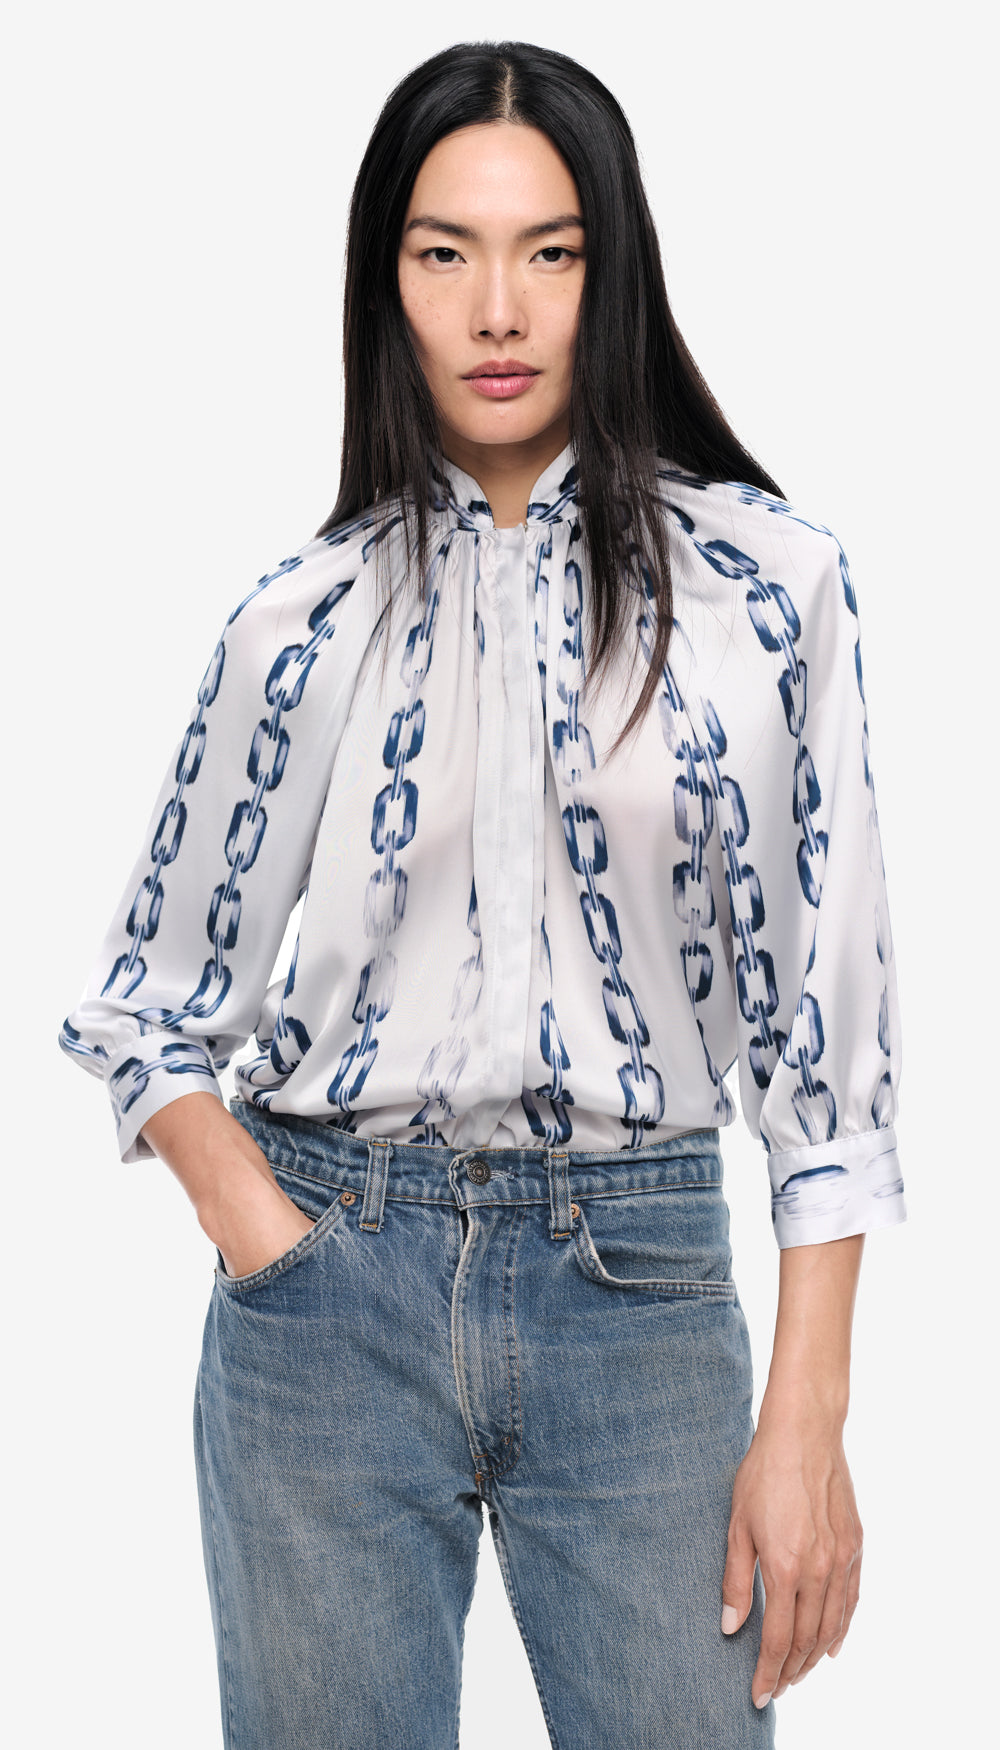 A woman in a white and blue printed blouse.